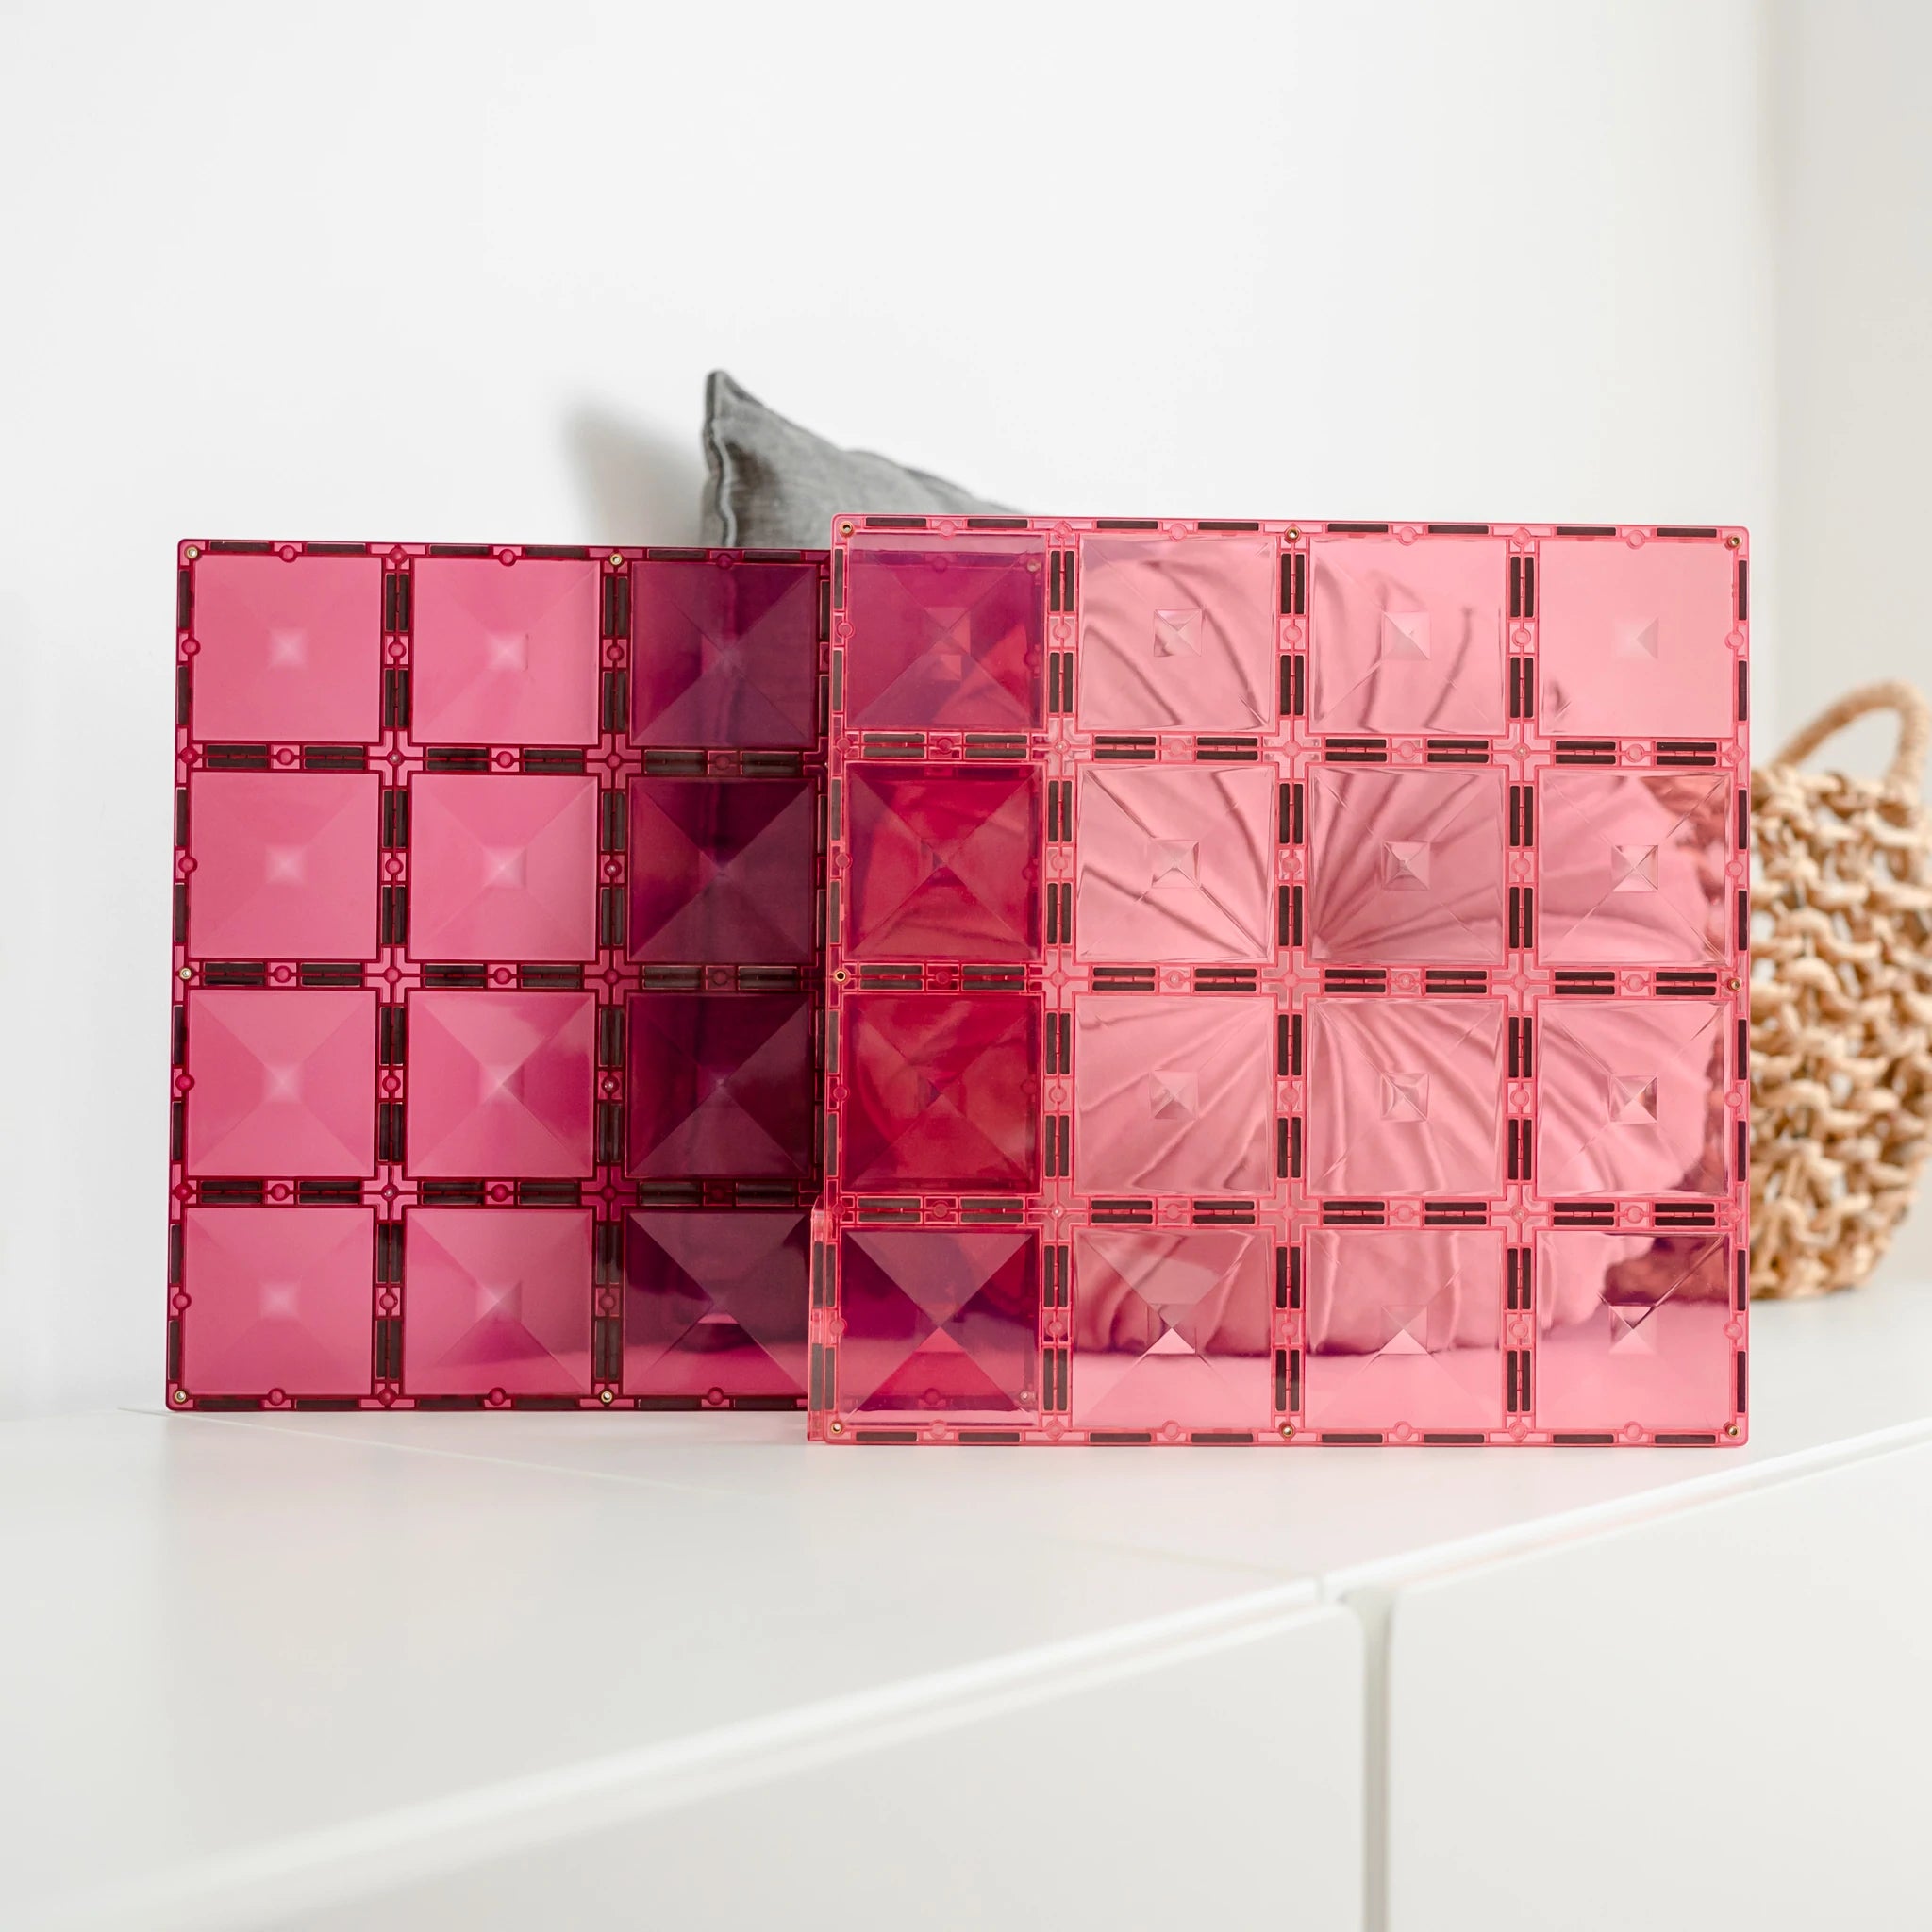 Connetix Tiles Magnetic Building Tiles Base Plate in Pink & Berry – 2 Piece Set